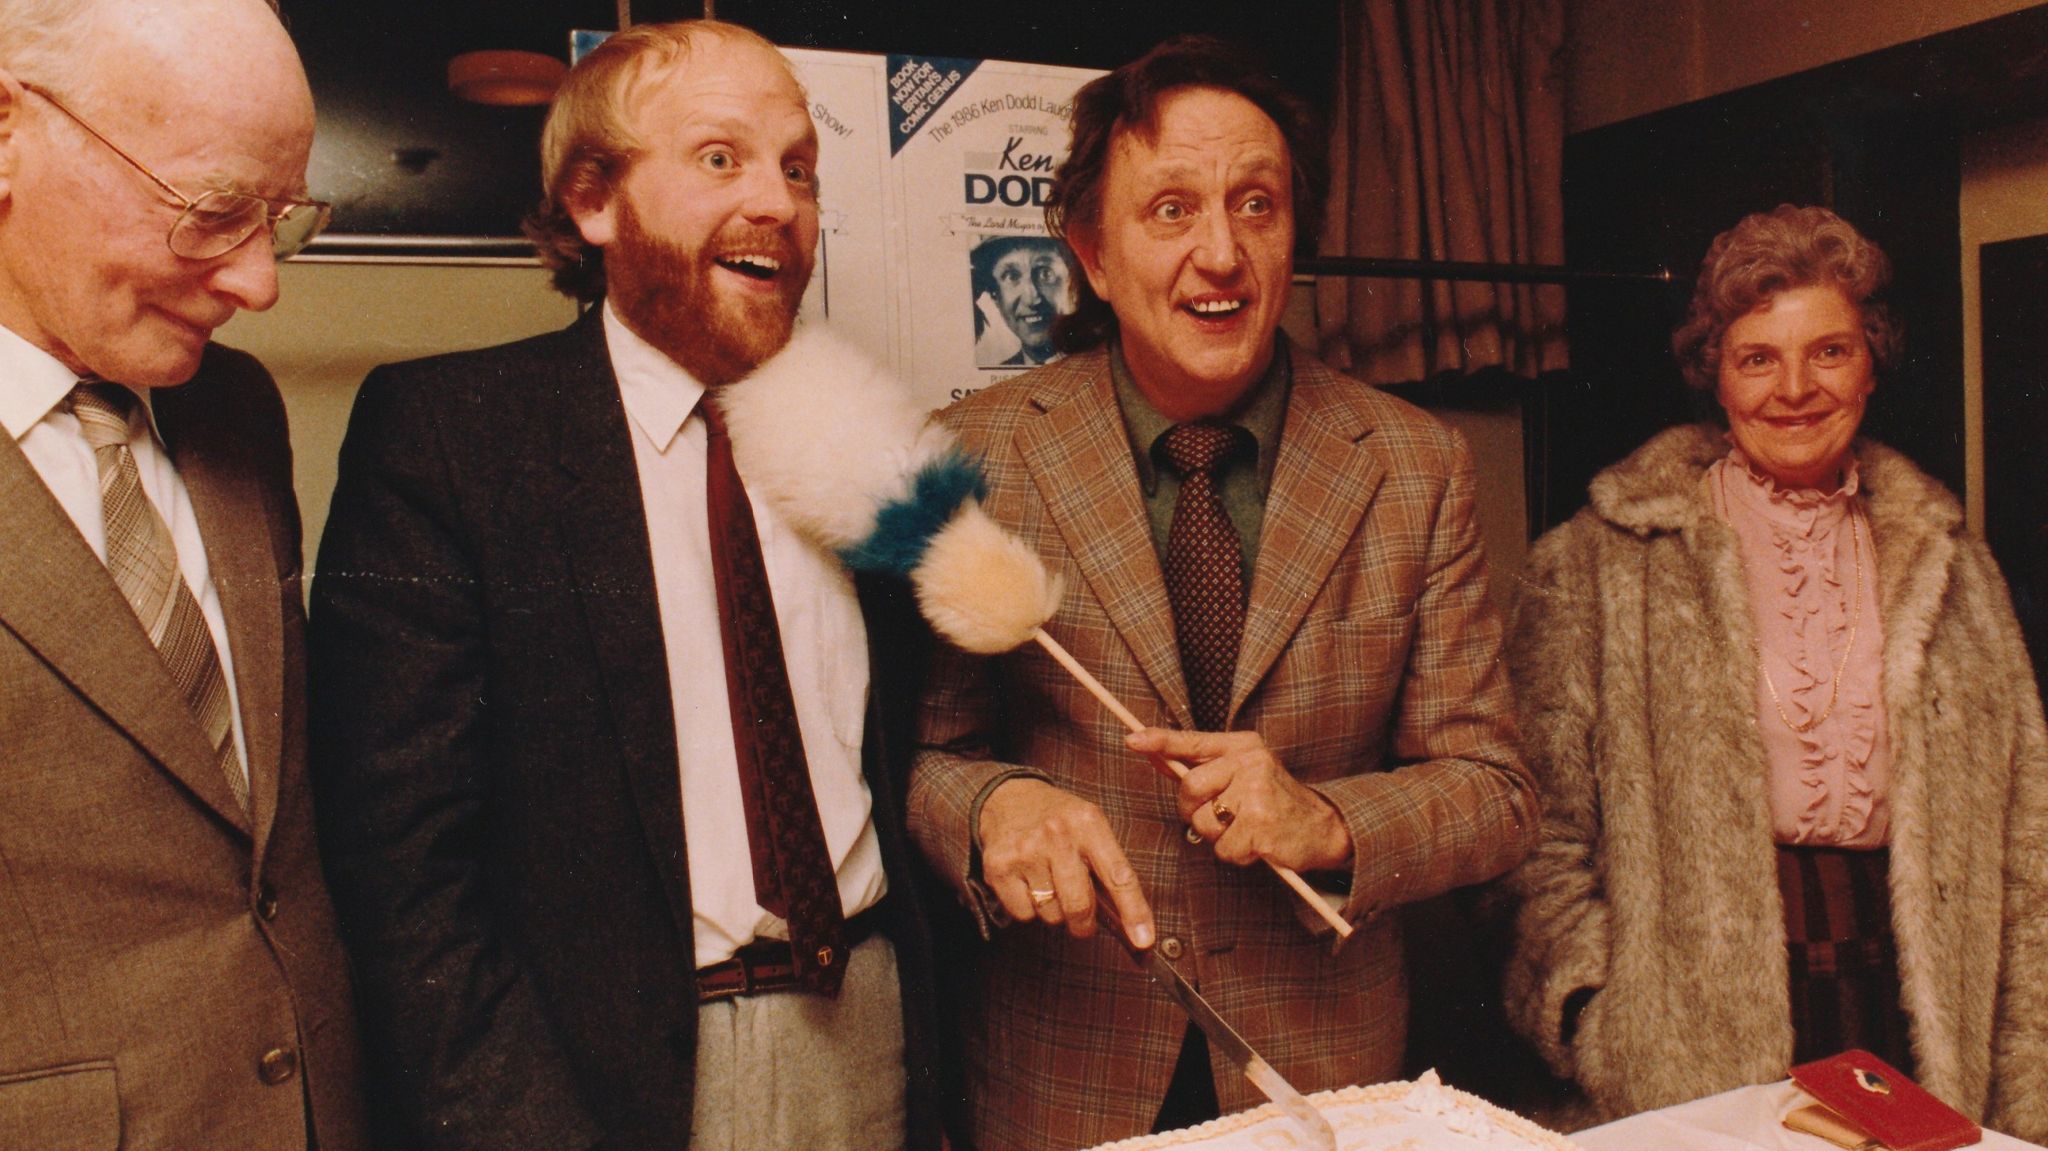 An archive photo showing Dave Latham with Ken Dodd who is waving one of his tickle sticks in Mr Latham's face. They are accompanied by two other people either side of them